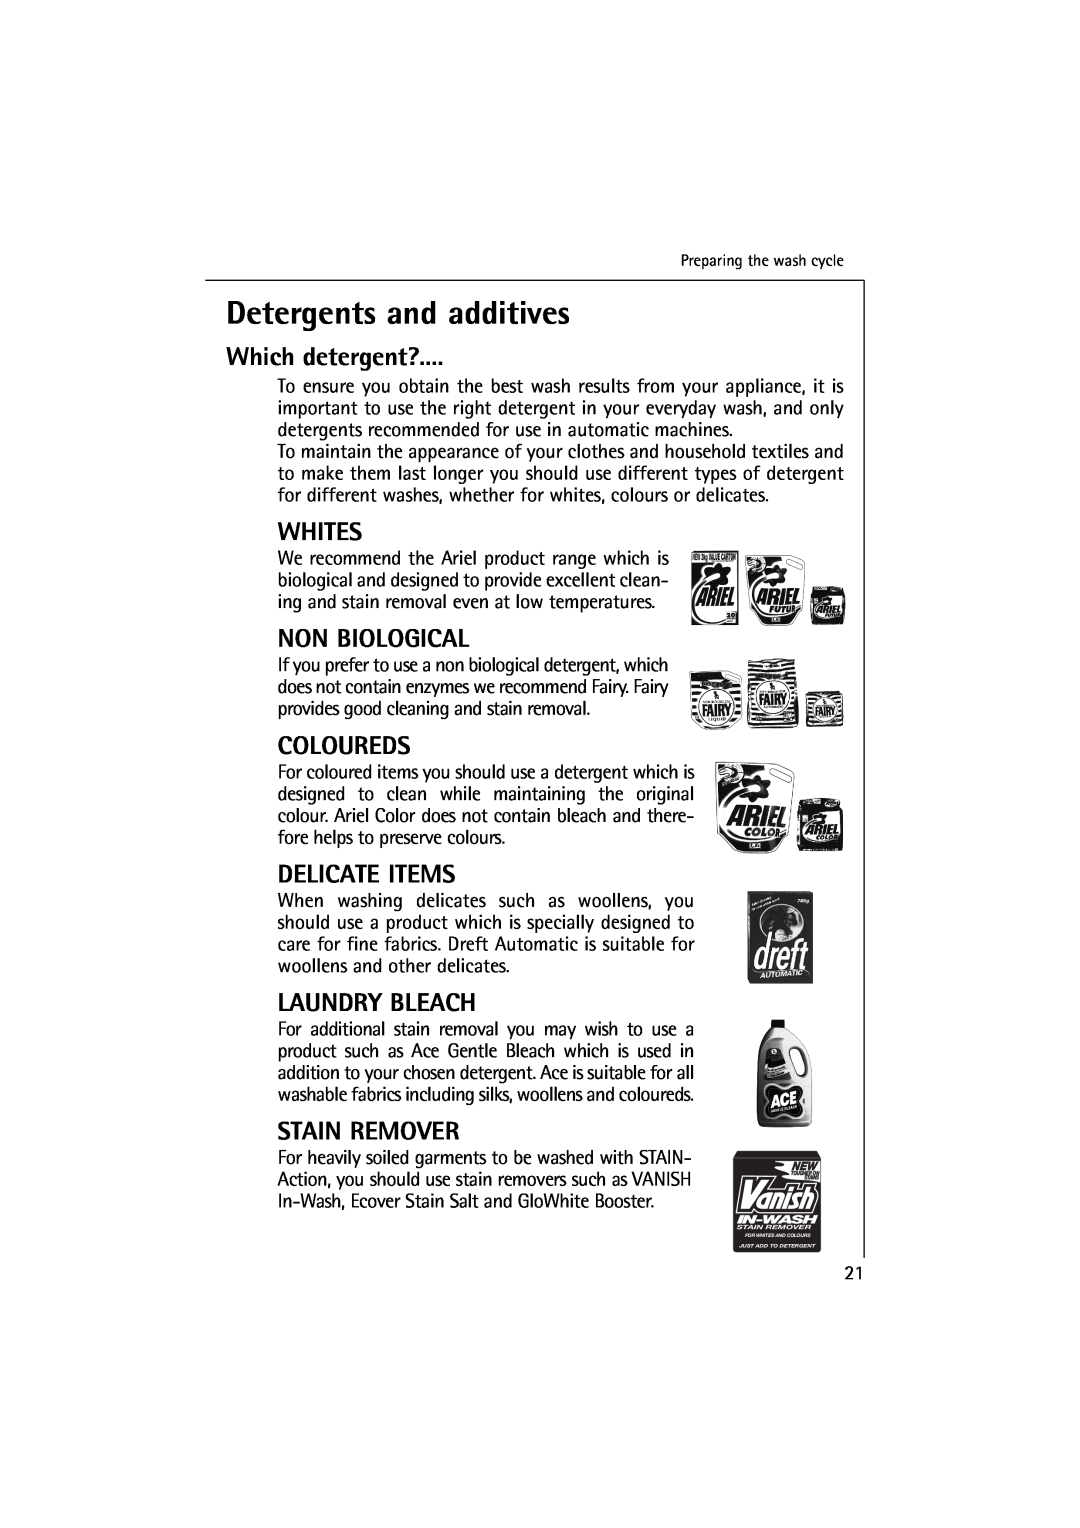 Electrolux 16830 manual Detergents and additives, Which detergent?, Whites, Non Biological, Coloureds, Delicate Items 